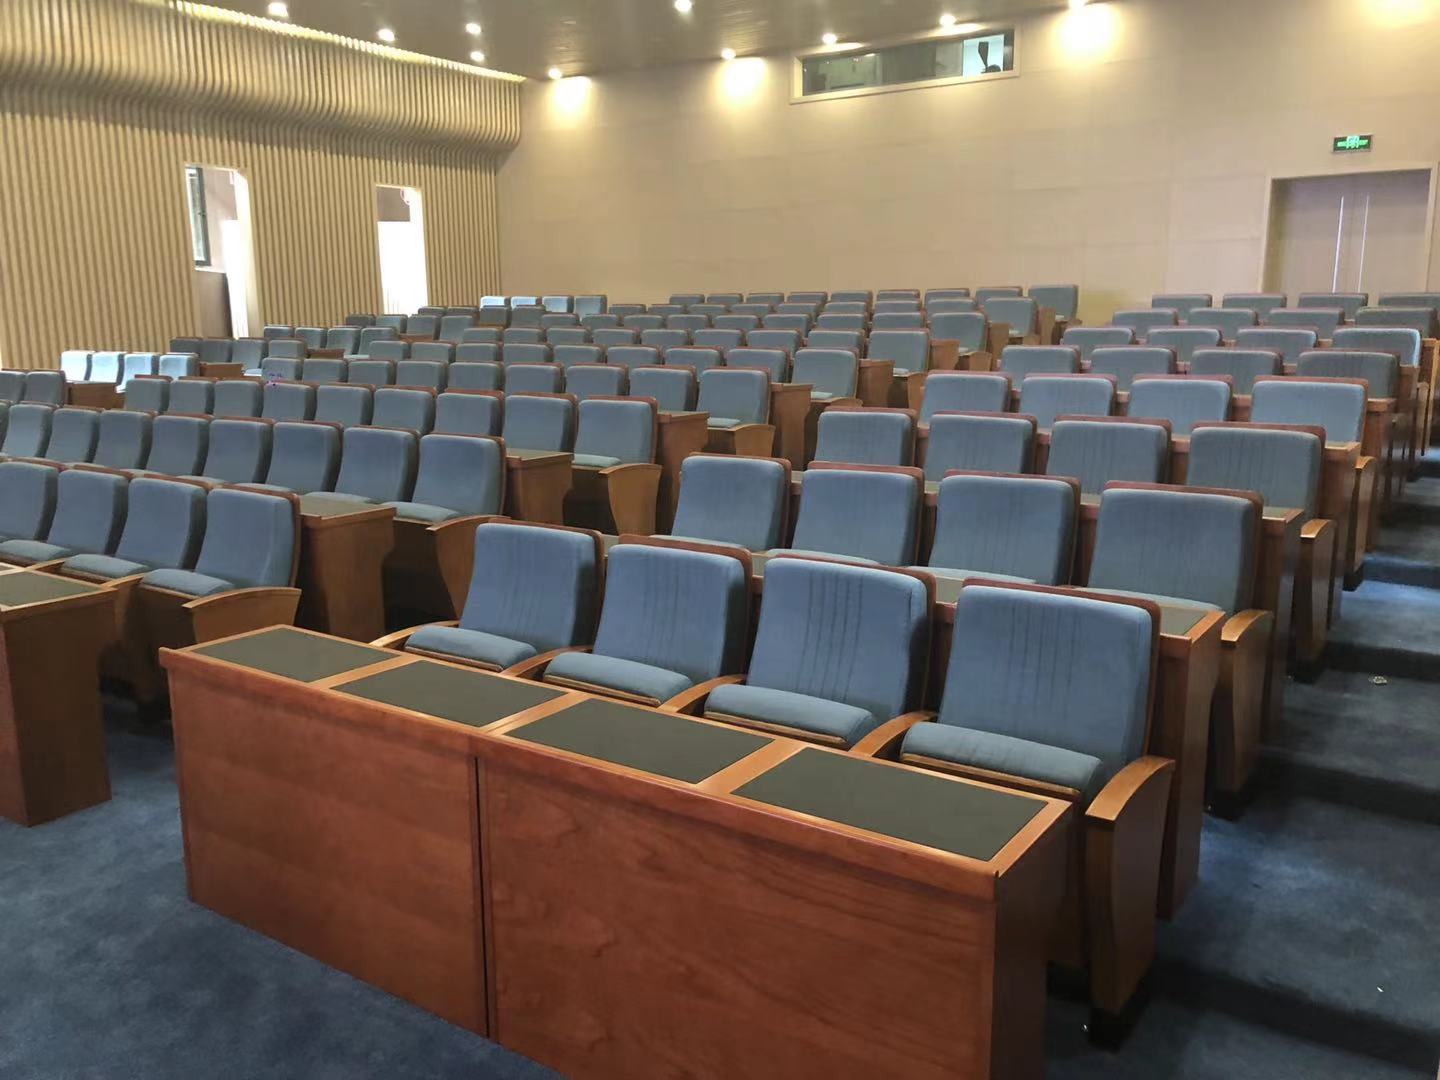 How to maintain fabric auditorium chairs?